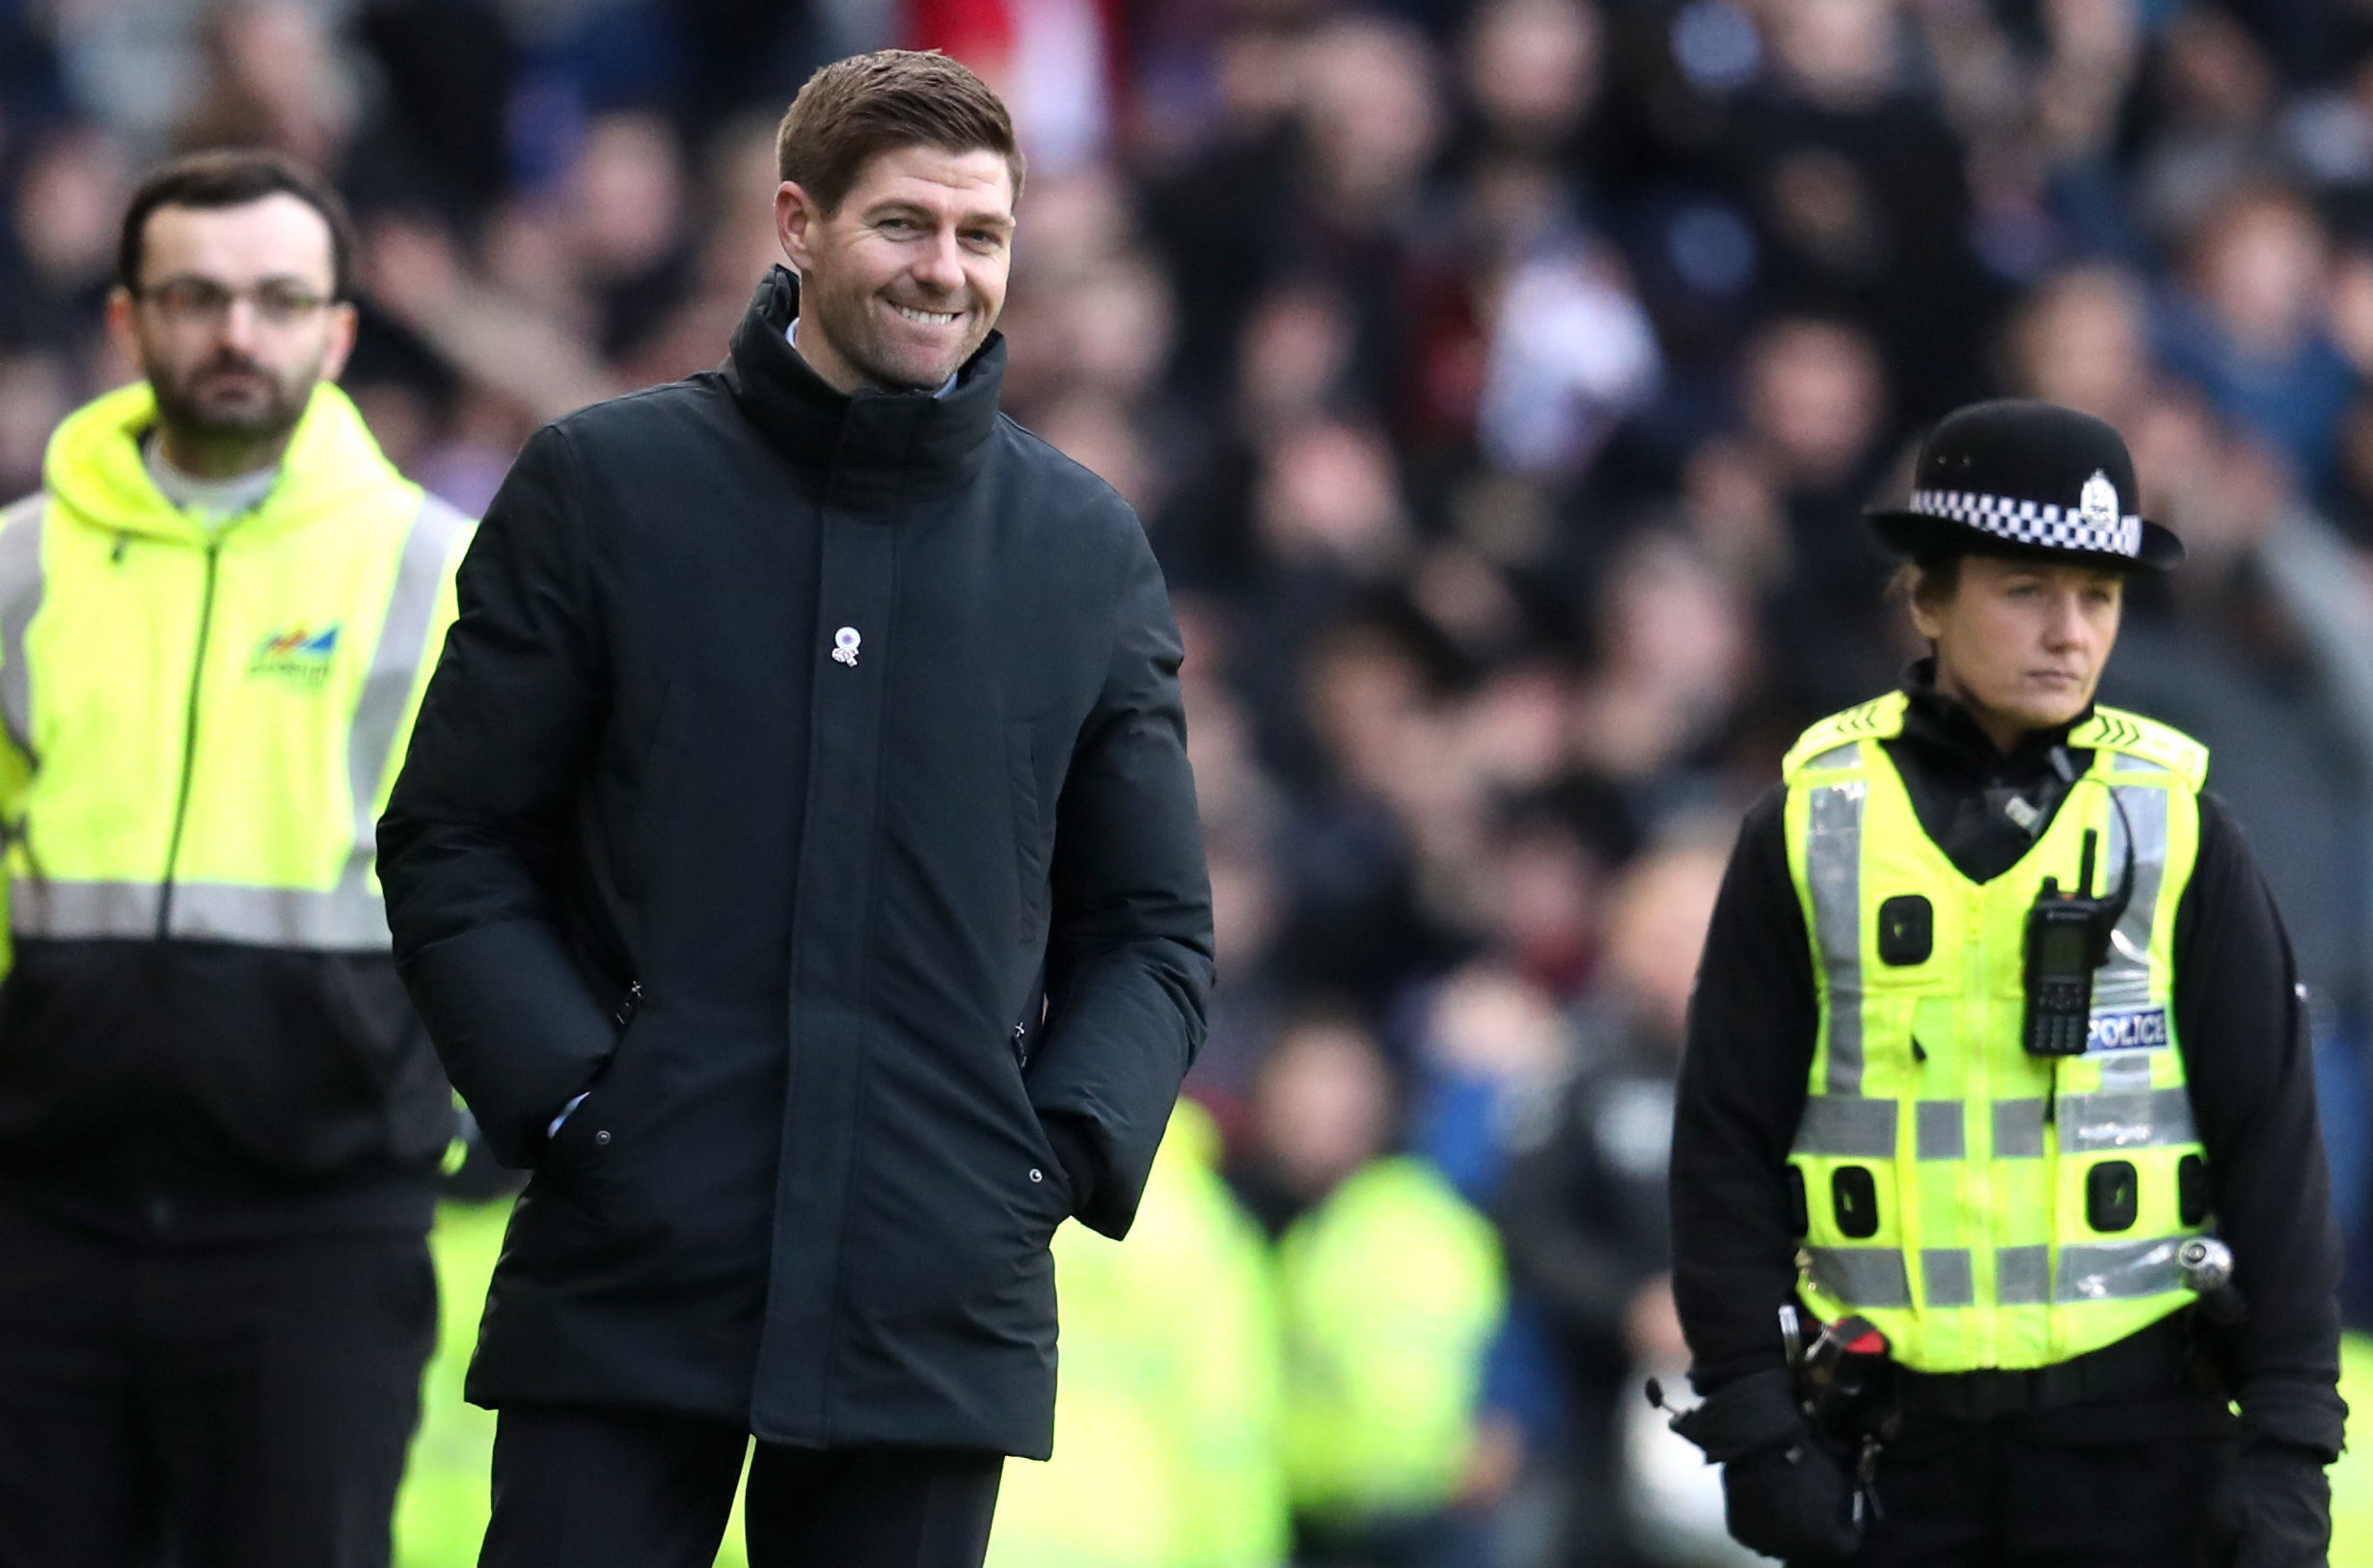 Rangers manager Steven Gerrard is all smiles at full time (Andrew Milligan/PA Wire)